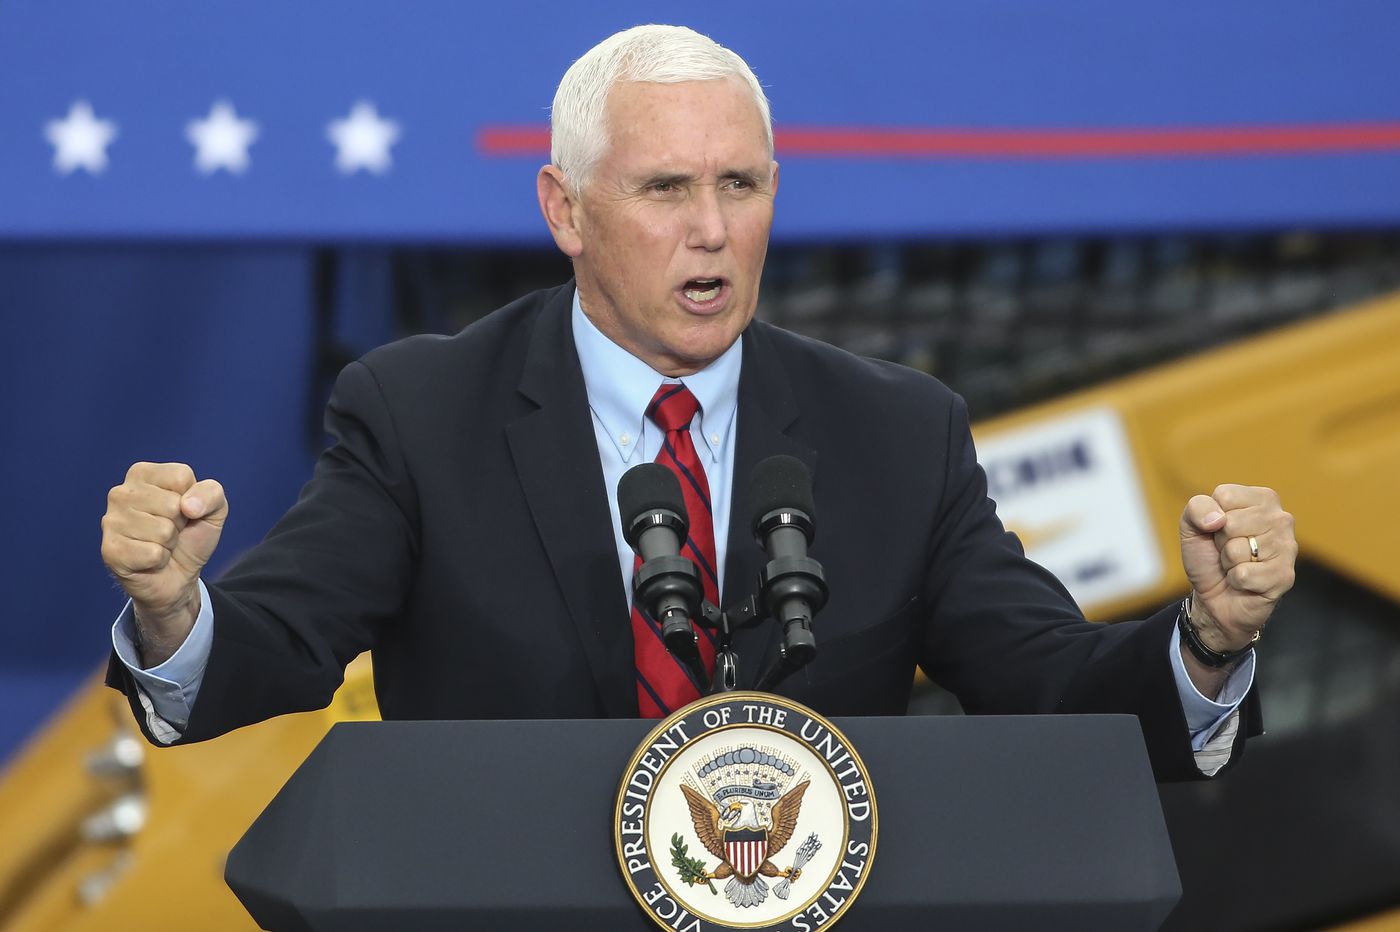 Mike Pence campaigns in Luzerne County, Pennsylvania, 2 days before Trump  visit